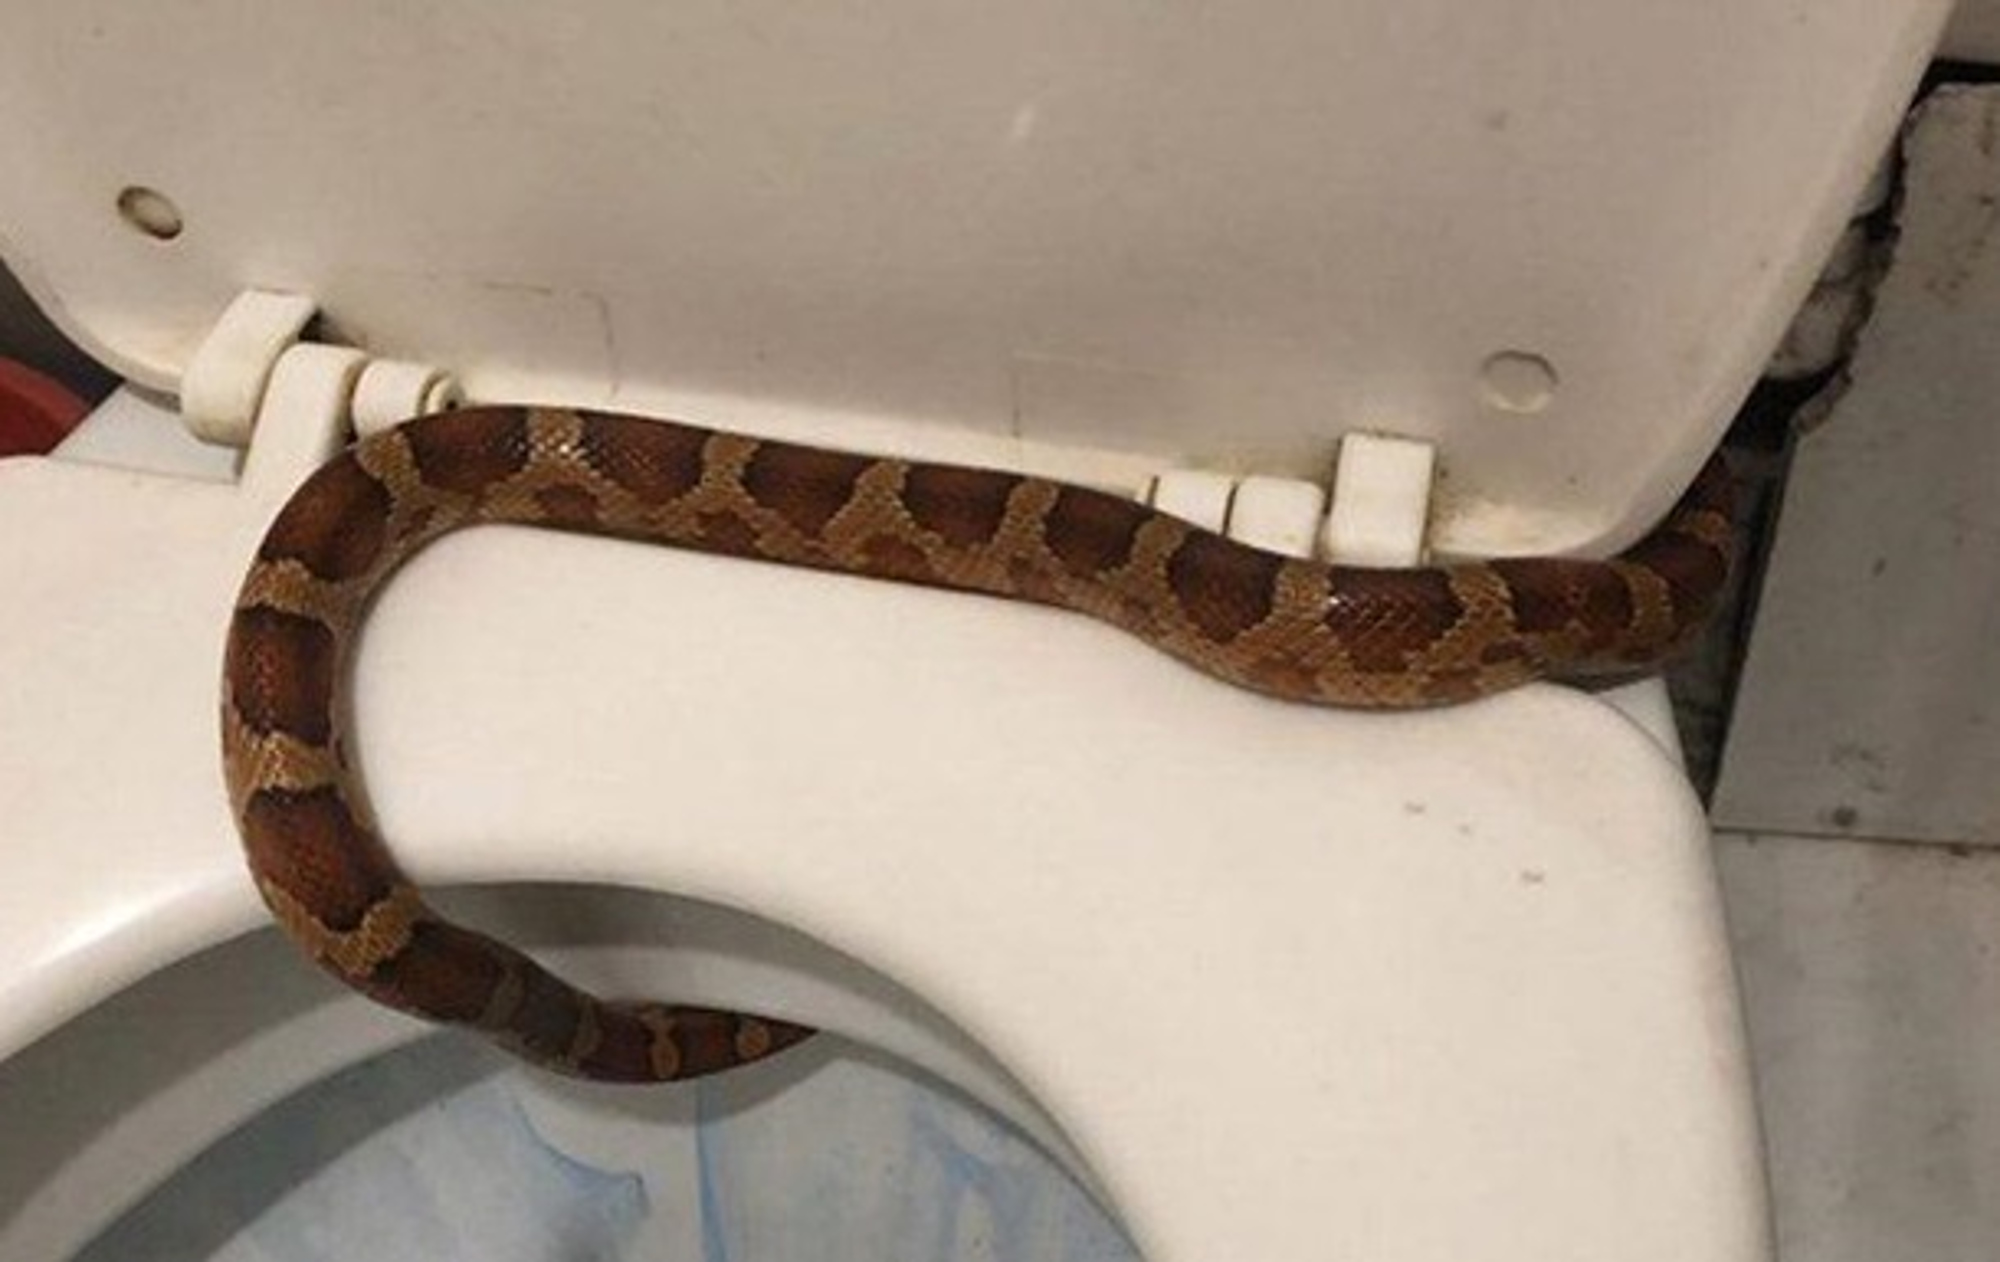 Read more about the article Russian Woman Finds Snake Slithering Around Toilet